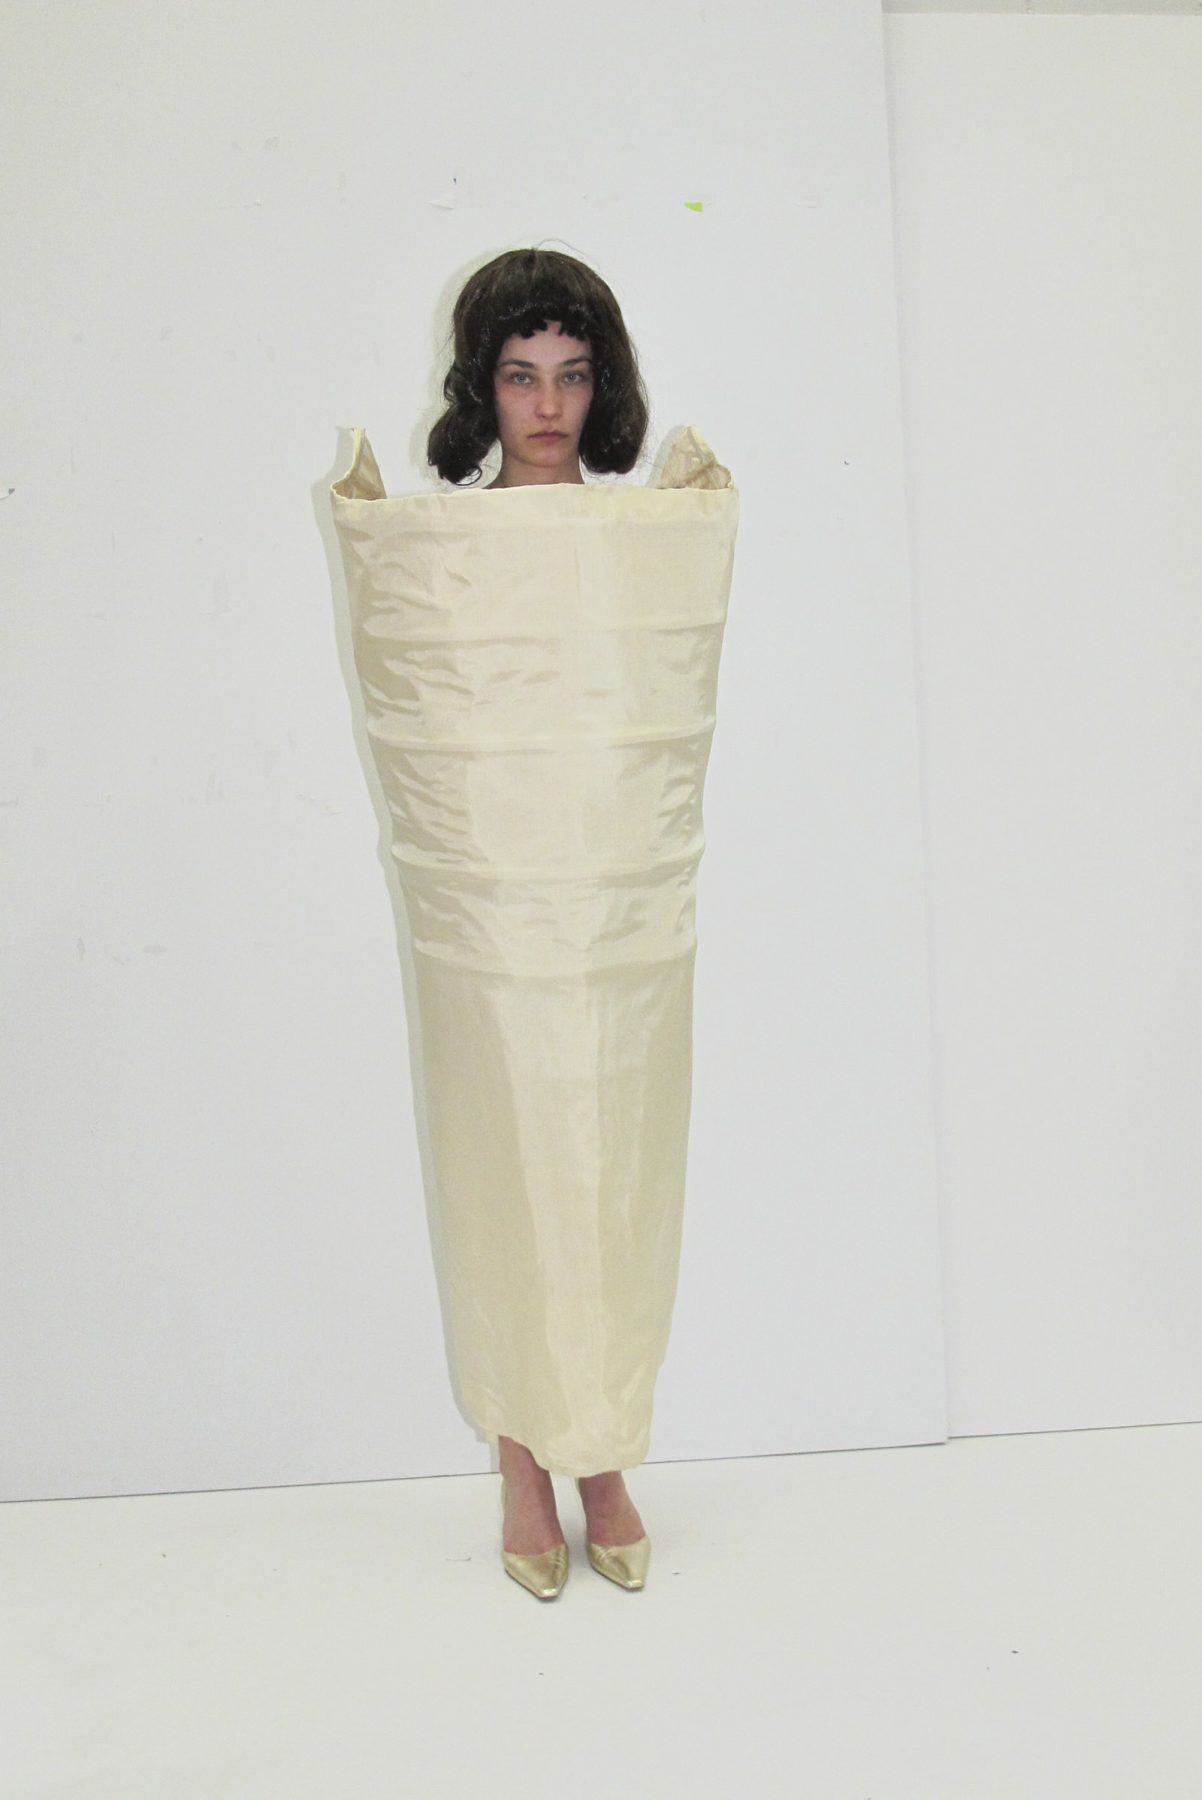 Photo of model wearing cone-shaped dress